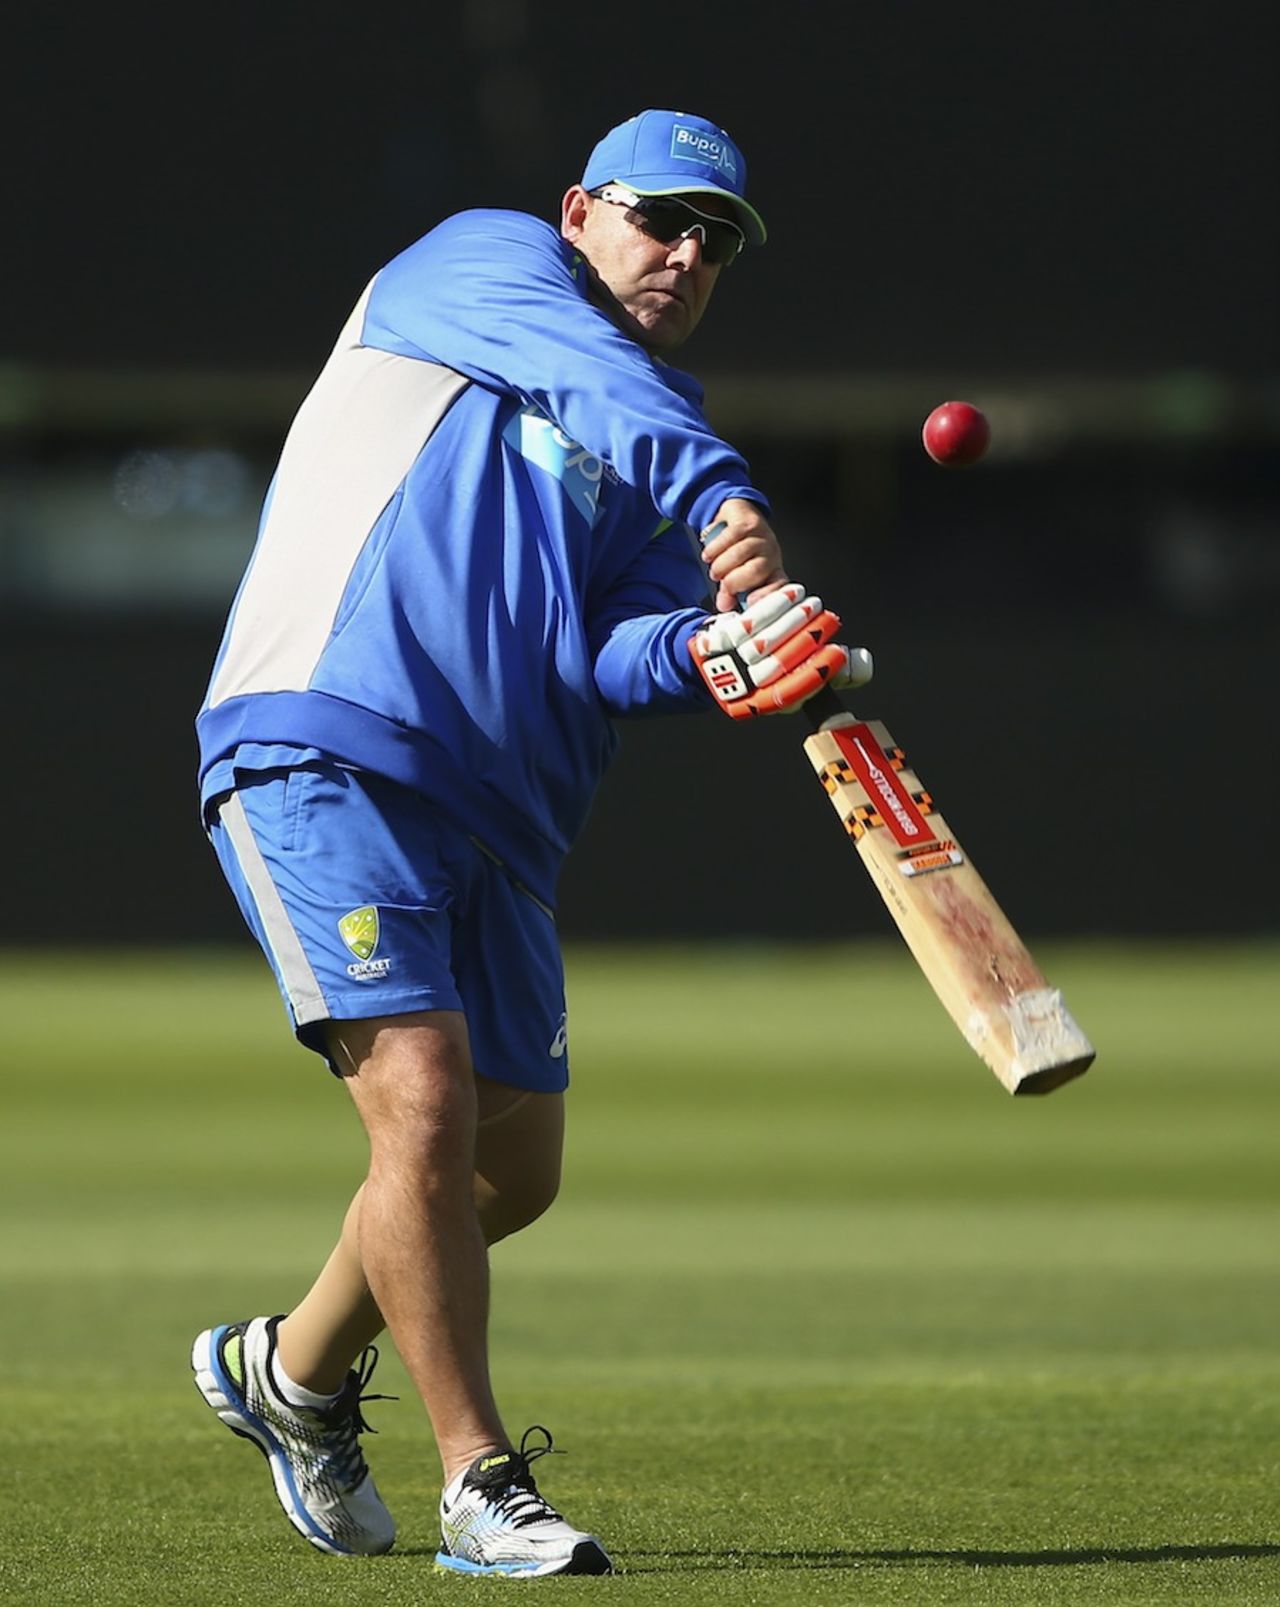 Darren Lehmann rejoined the team after getting treated for deep vein thrombosis, Wellington, February 10, 2016